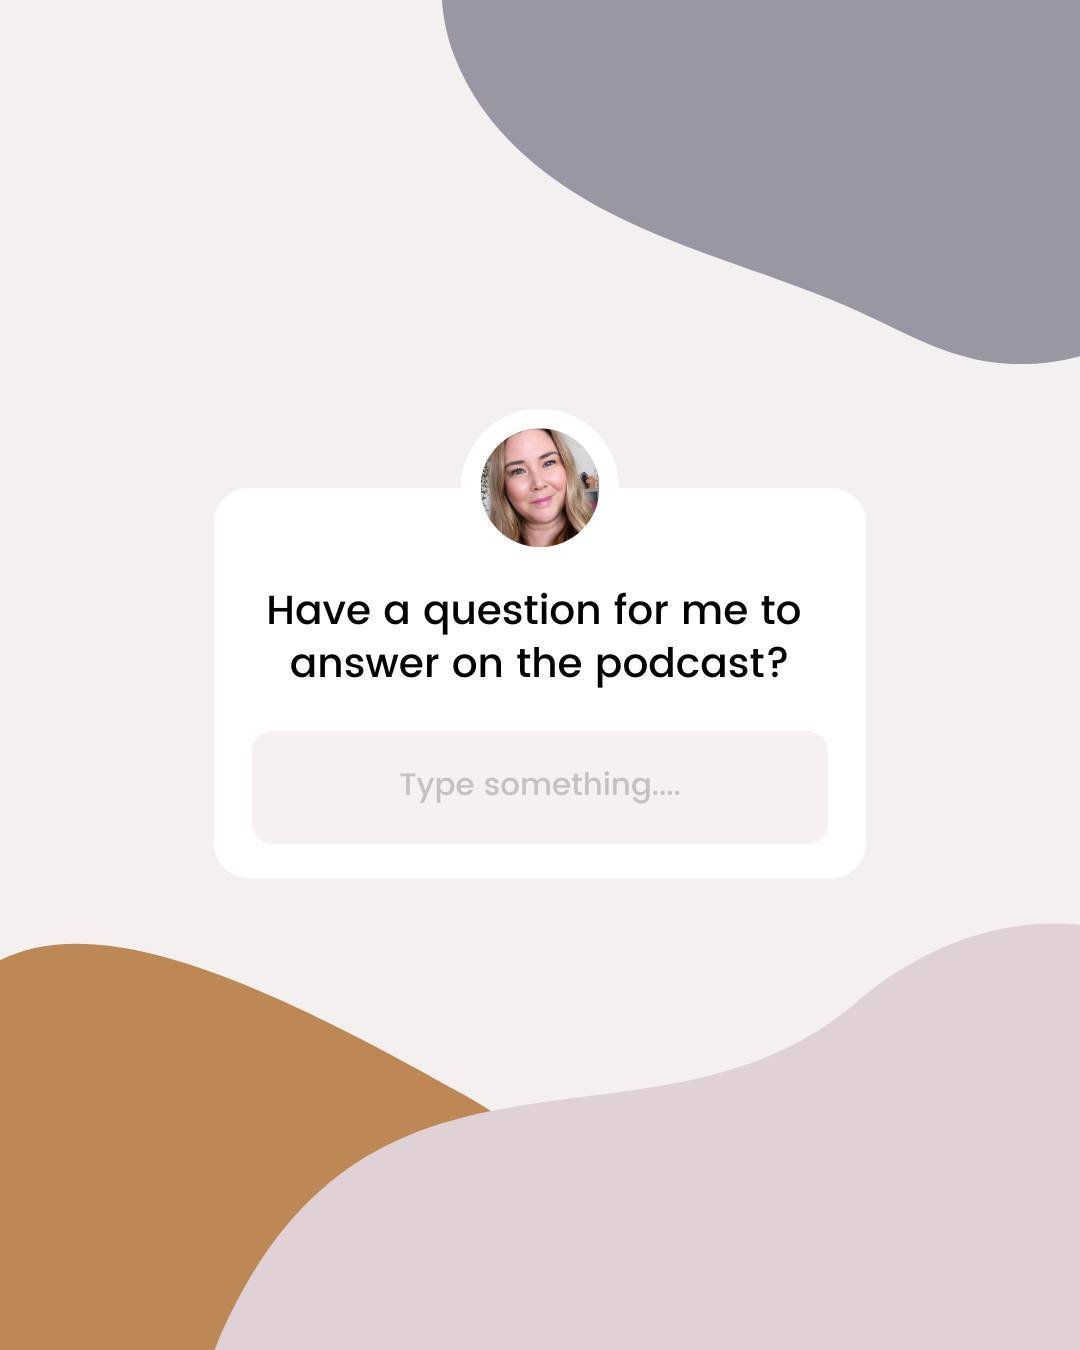 I'd love to answer your burning questions on The Guided Collective Podcast !!⁠
⁠
Leave me a comment below for something you'd love me to cover, explore or explain on the podcast in an upcoming episode. ⁠
⁠
To ensure yours gets answered, please keep t